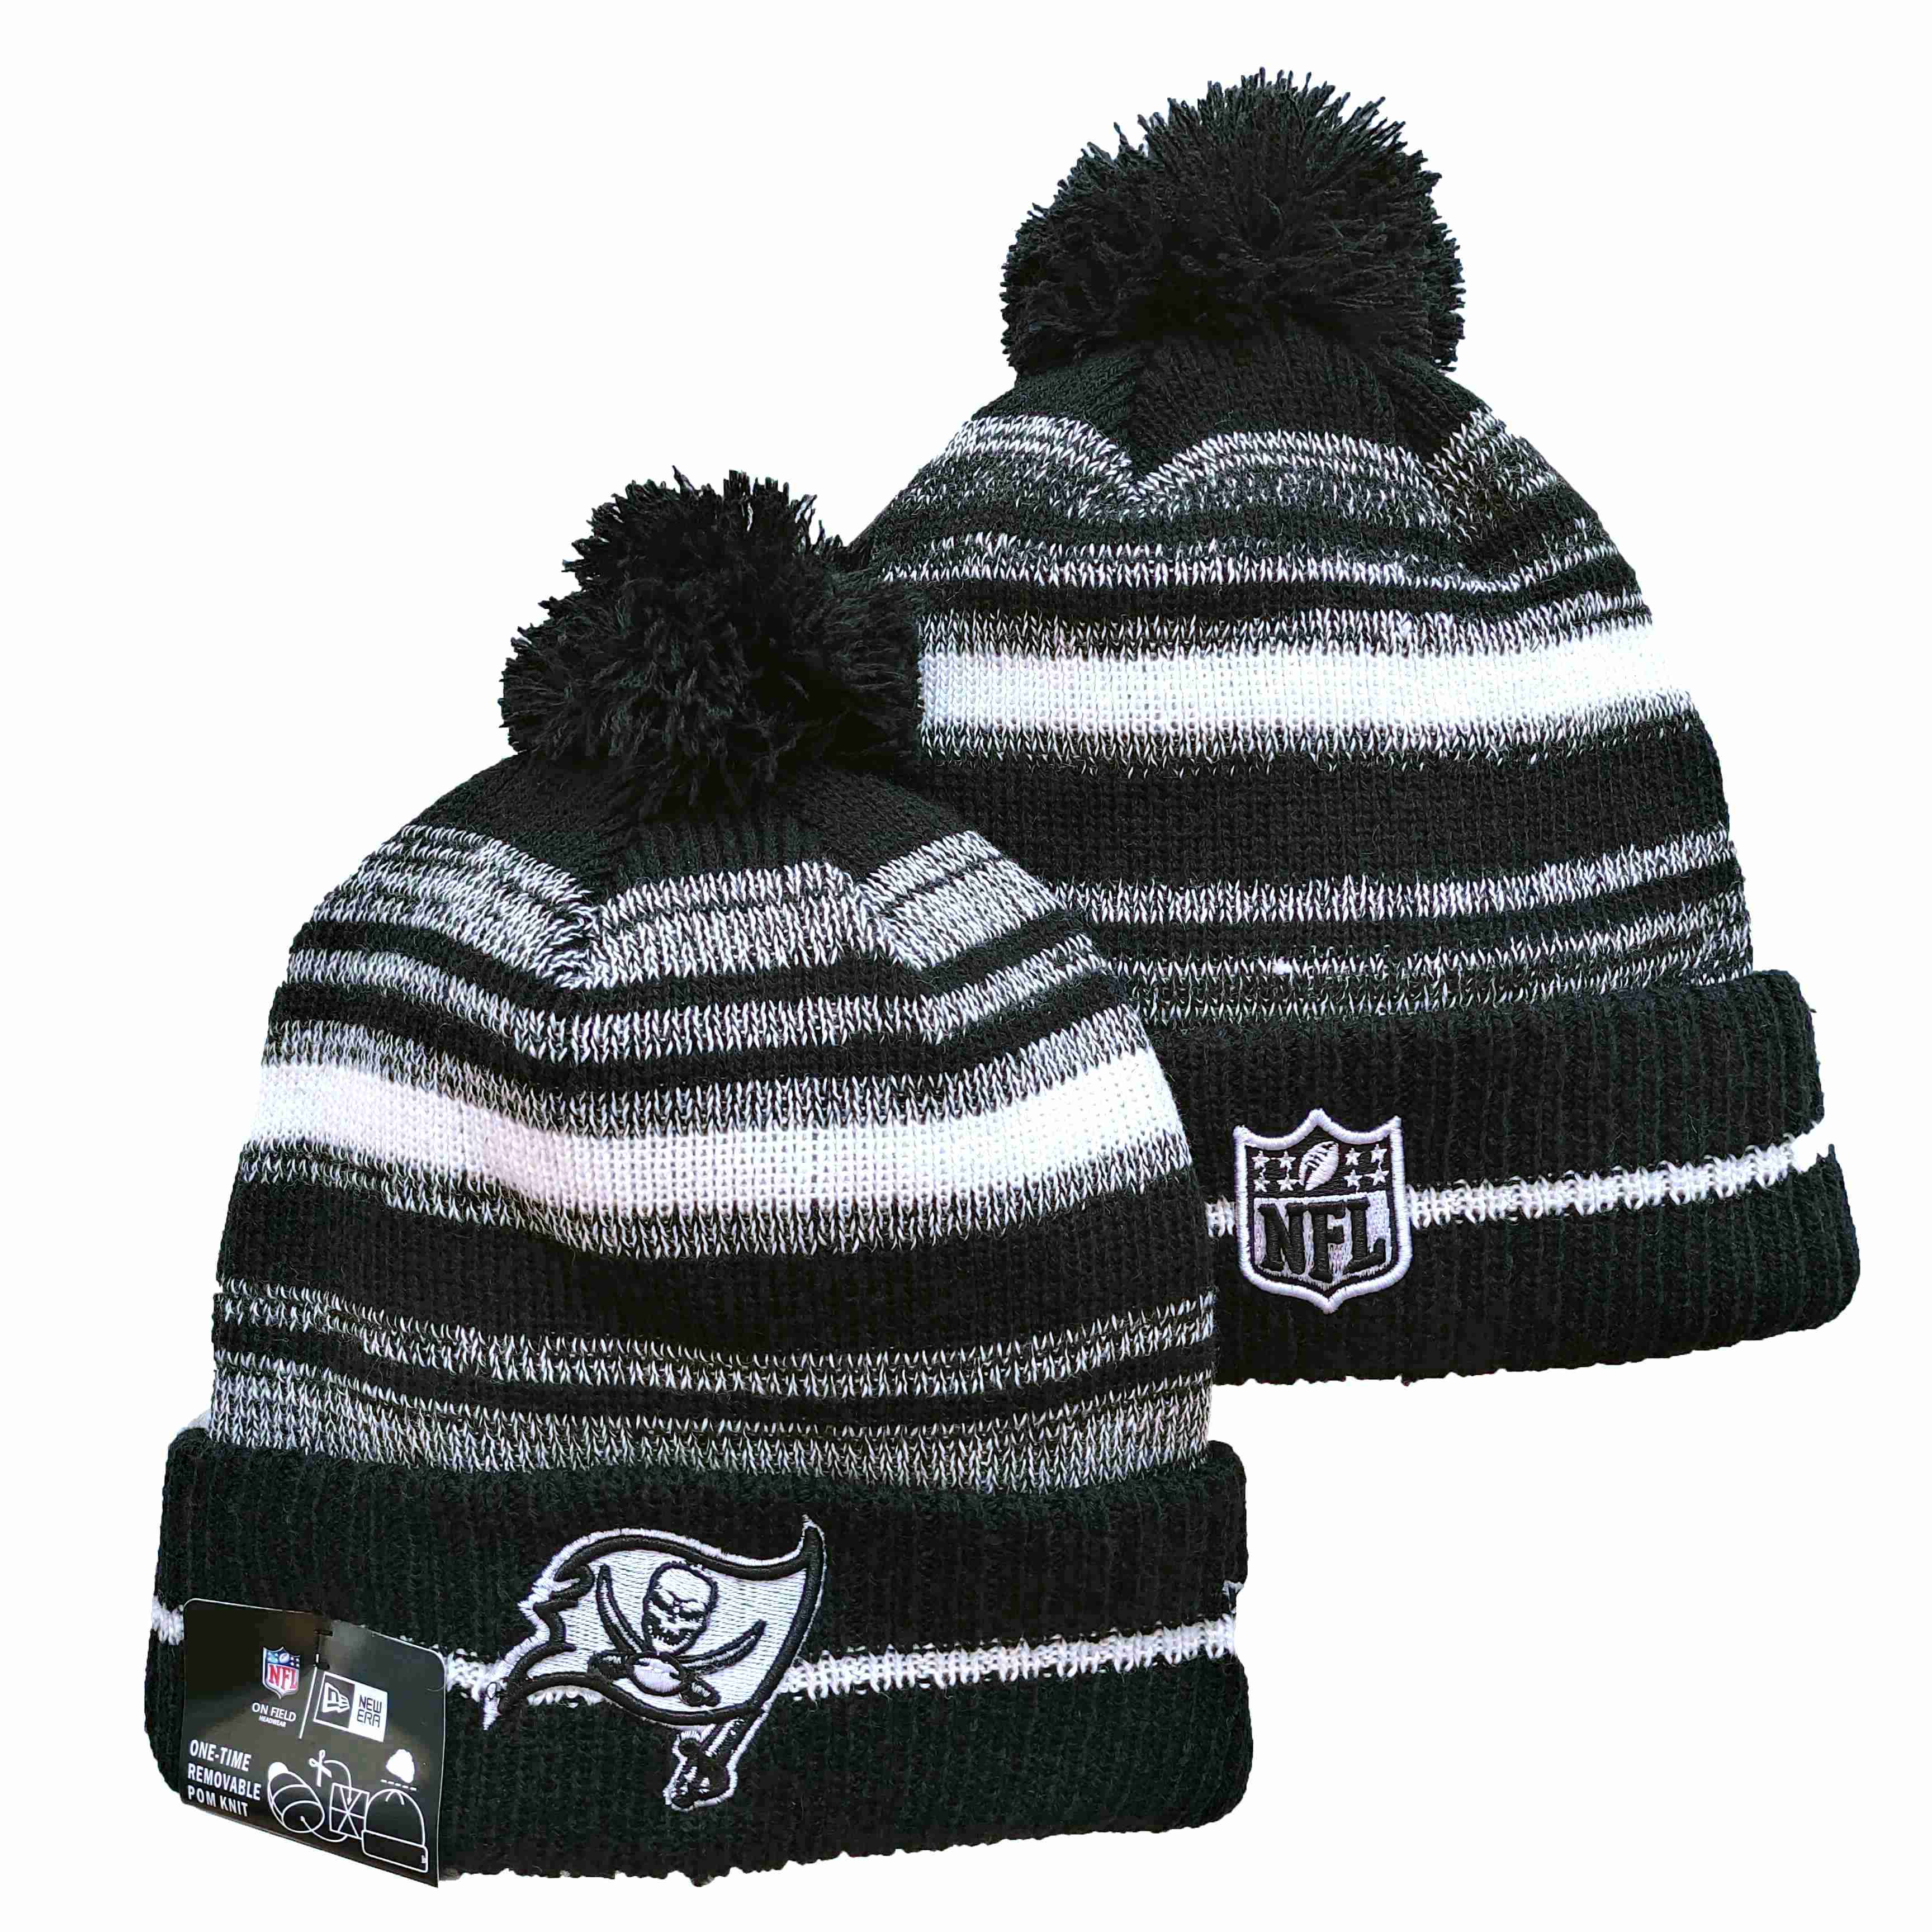 Tampa Bay Buccaneers Knit Hats 0223